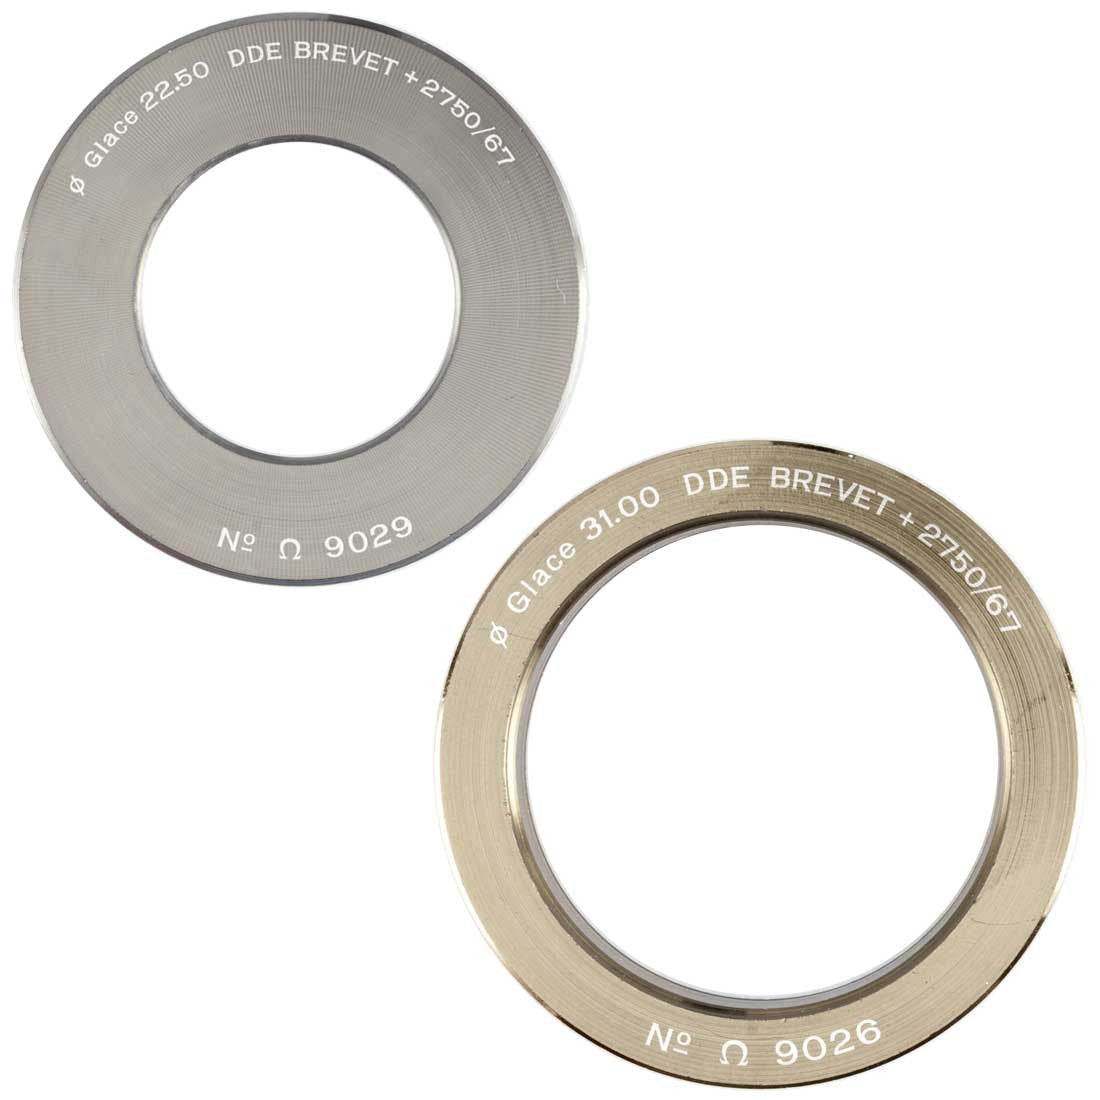 Omega Reduction Ring for Installing Crytals